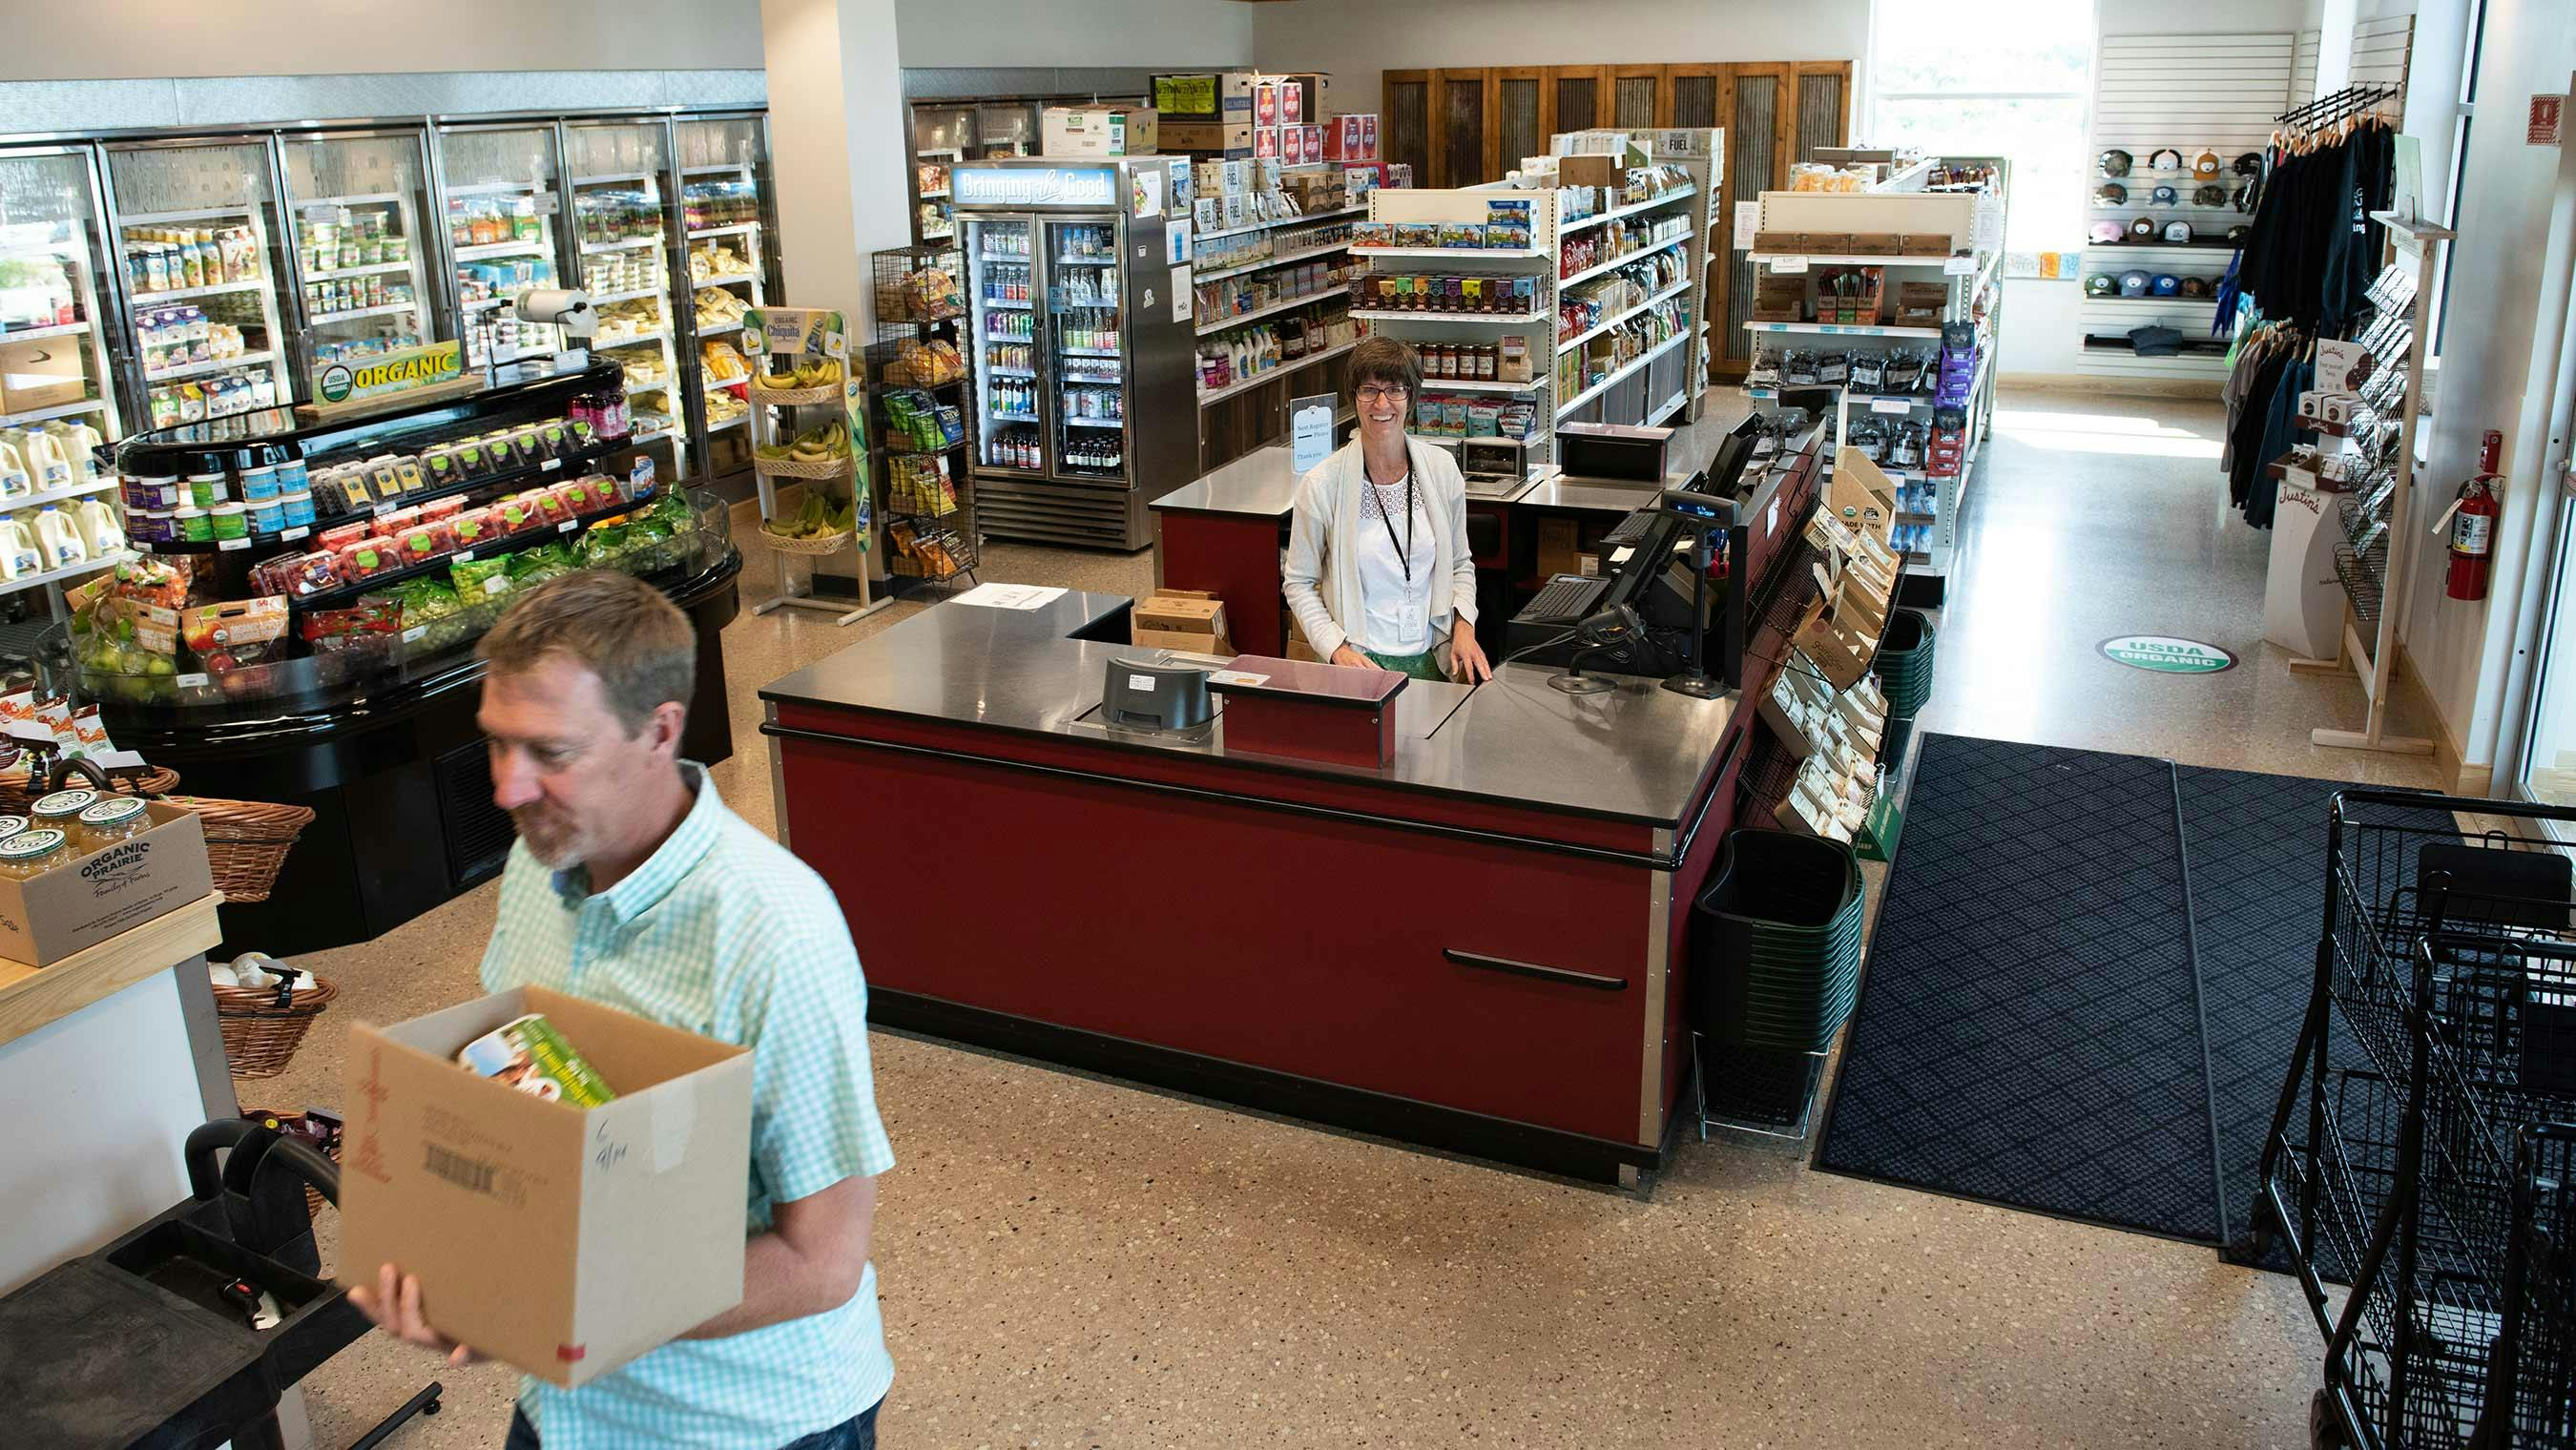 A customer purchasing groceries at Organic Valley's retail store.